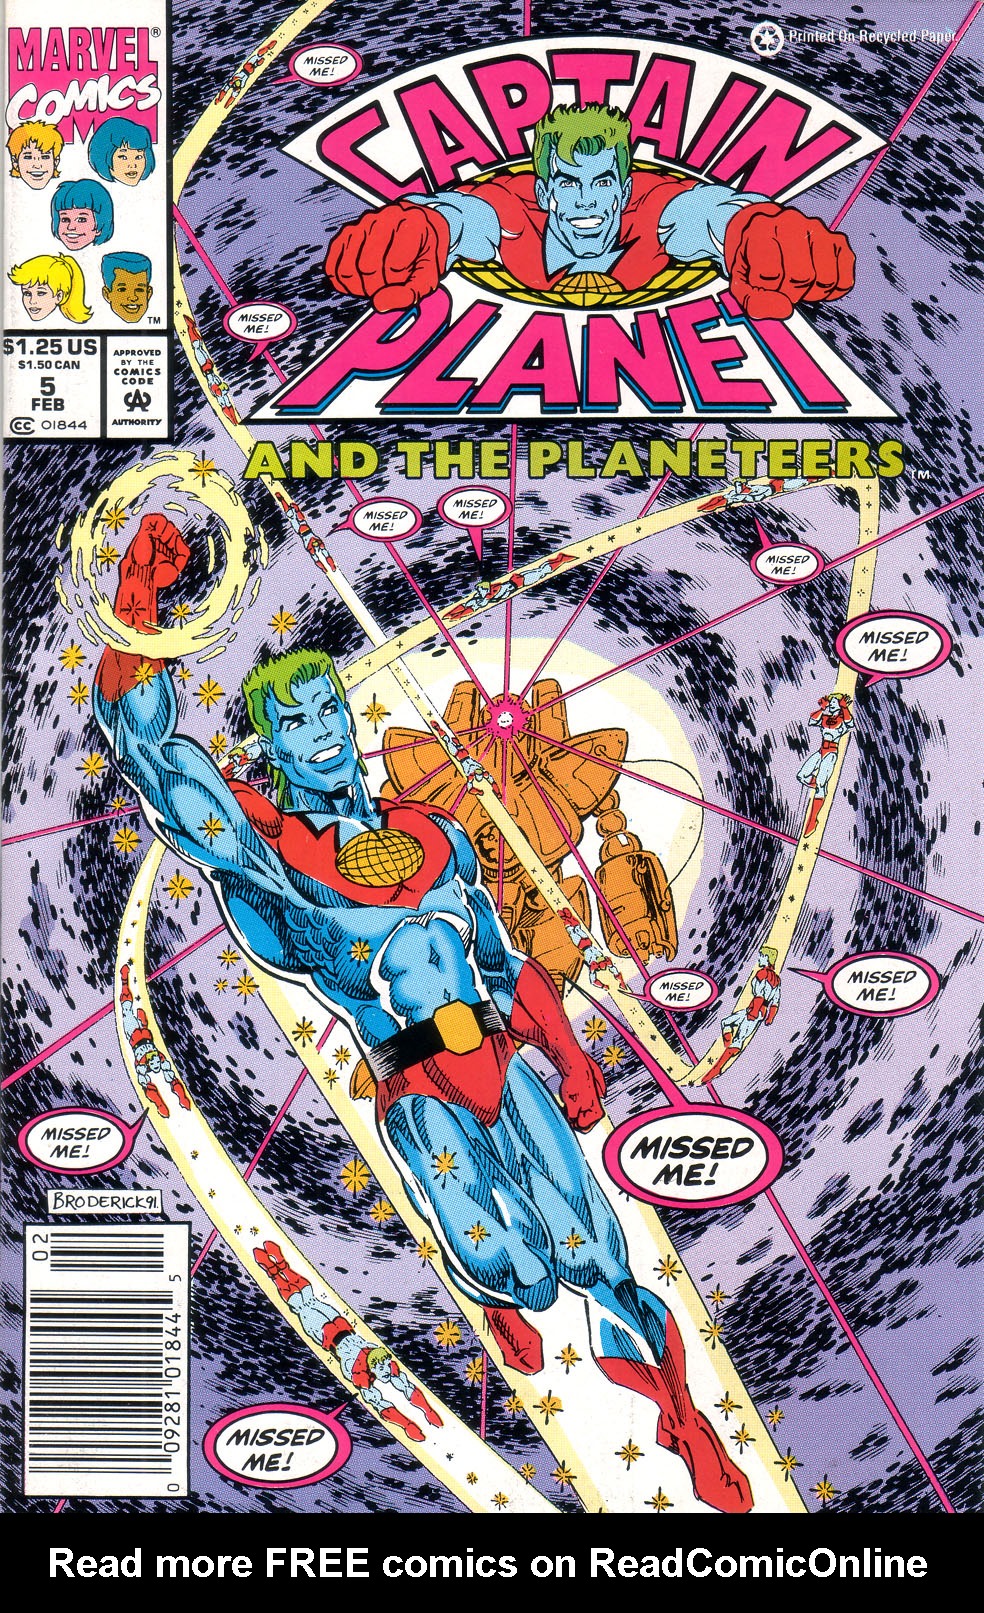 Shemale Captain Planet - Captain Planet And The Planeteers Issue 5 | Read Captain Planet And The  Planeteers Issue 5 comic online in high quality. Read Full Comic online for  free - Read comics online in